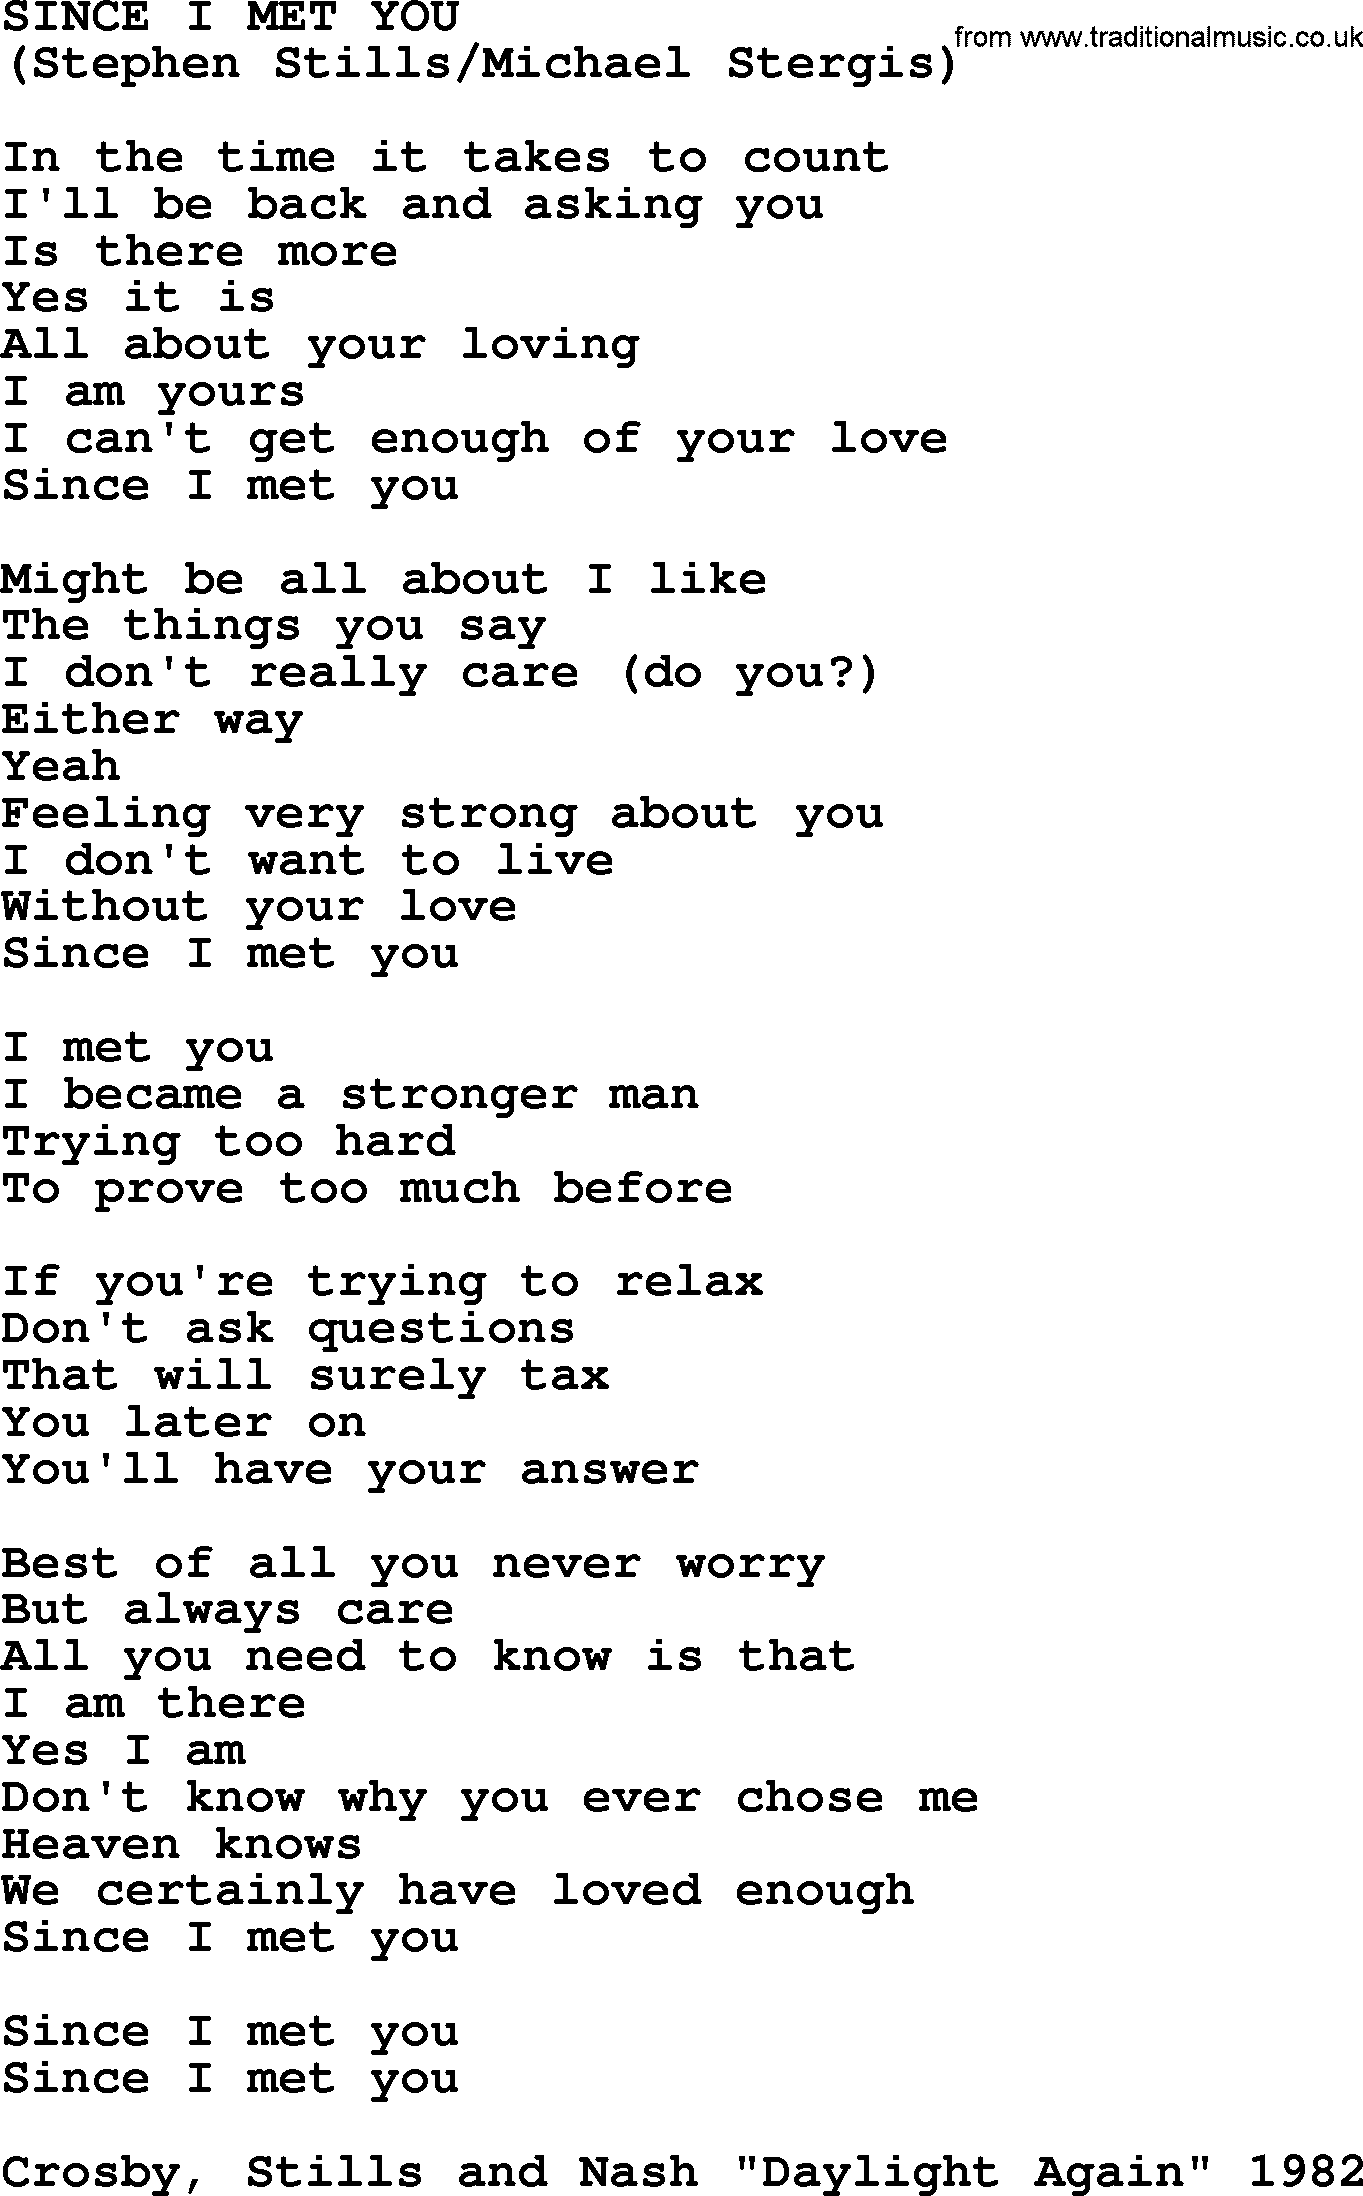 The Byrds song Since I Met You, lyrics